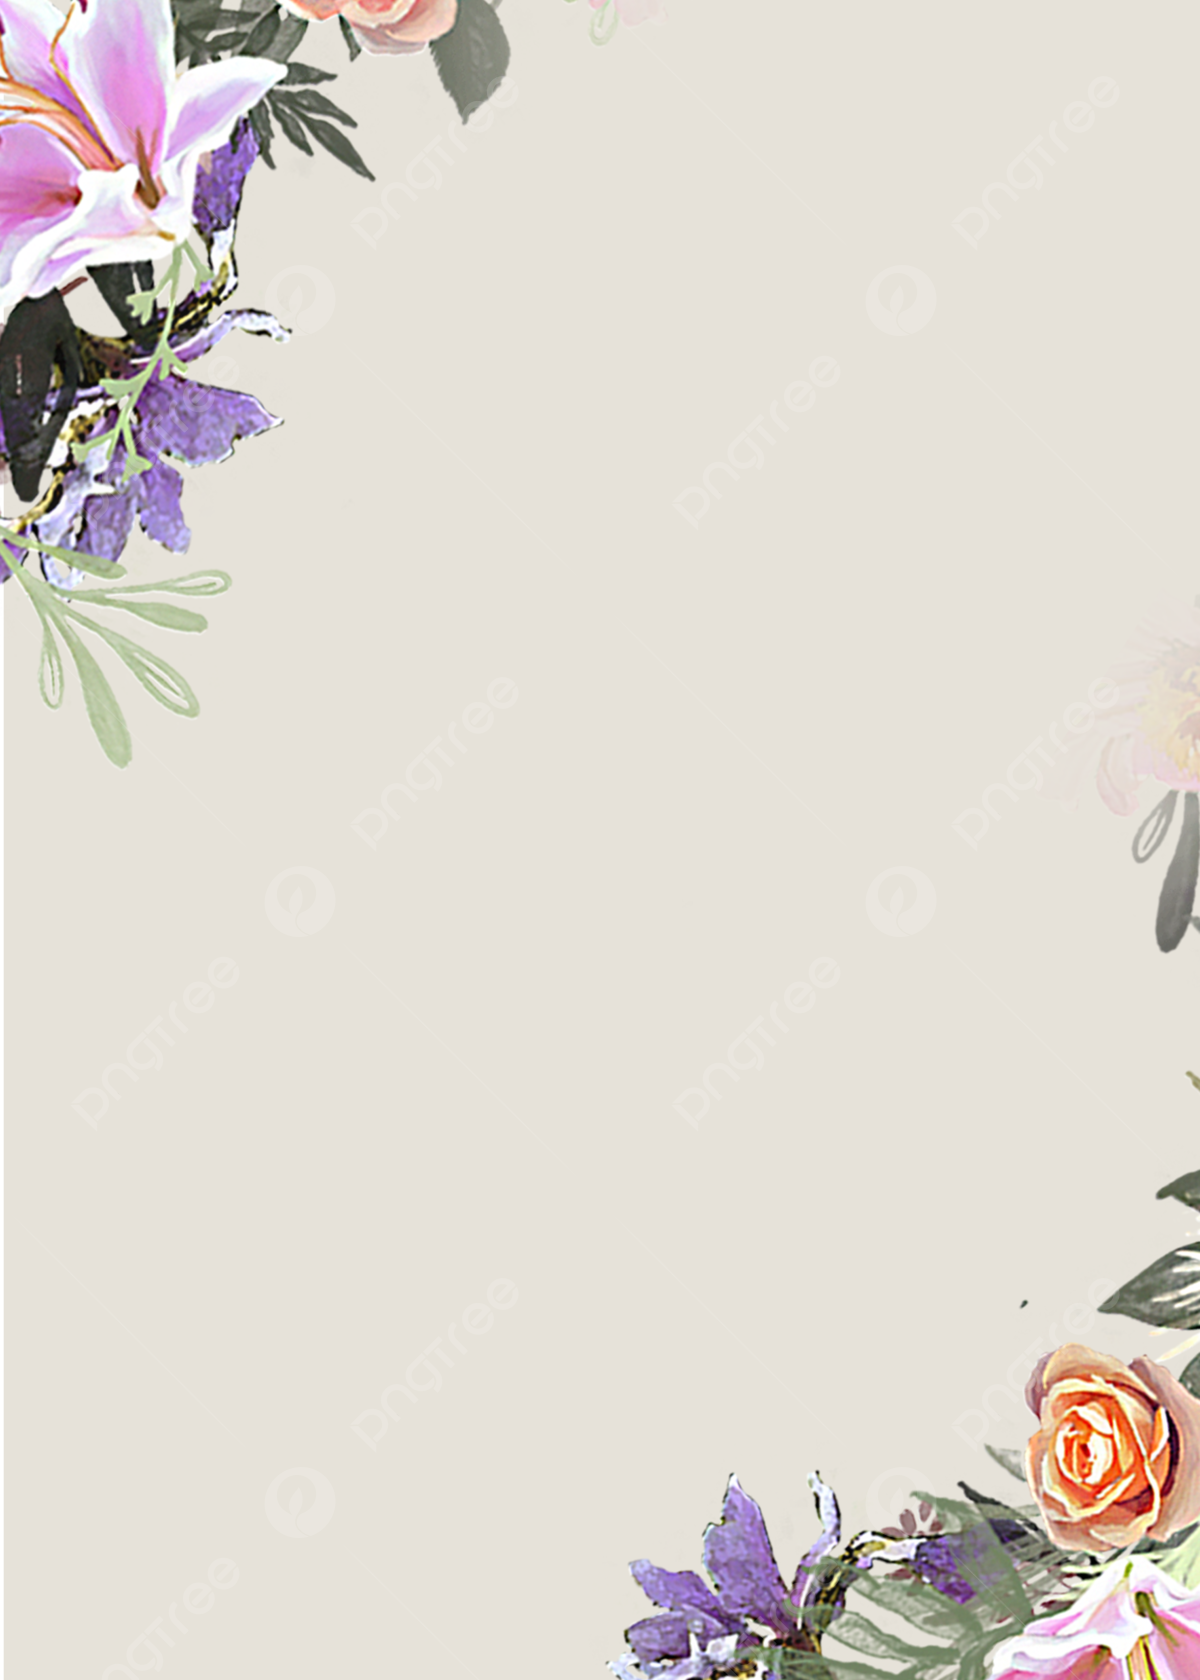 Simple Watercolor Flowers Wallpaper Background, Watercolour, Watercolor Flower, Simple Background Image for Free Download